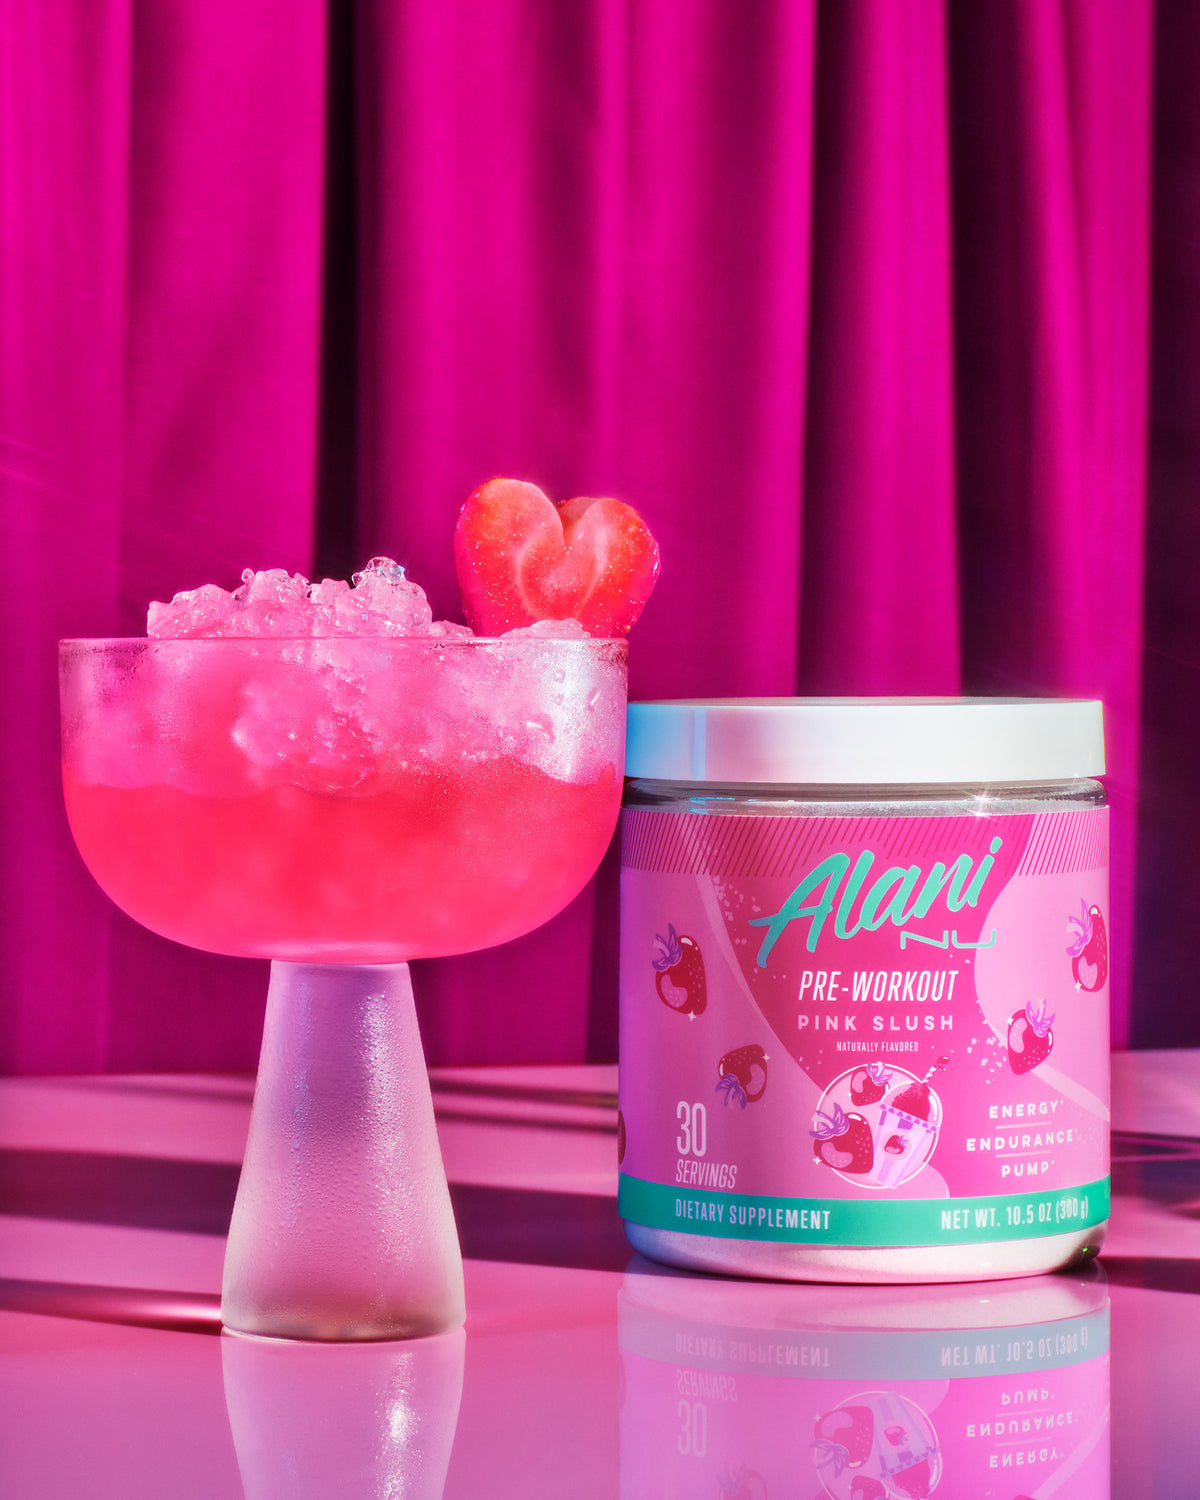 A tub of Alani Nu Pink Slush Pre-Workout next to a frosted coup glass 	filled with pebble ice and pink liquid garnished with a heart-shaped	strawberry.   